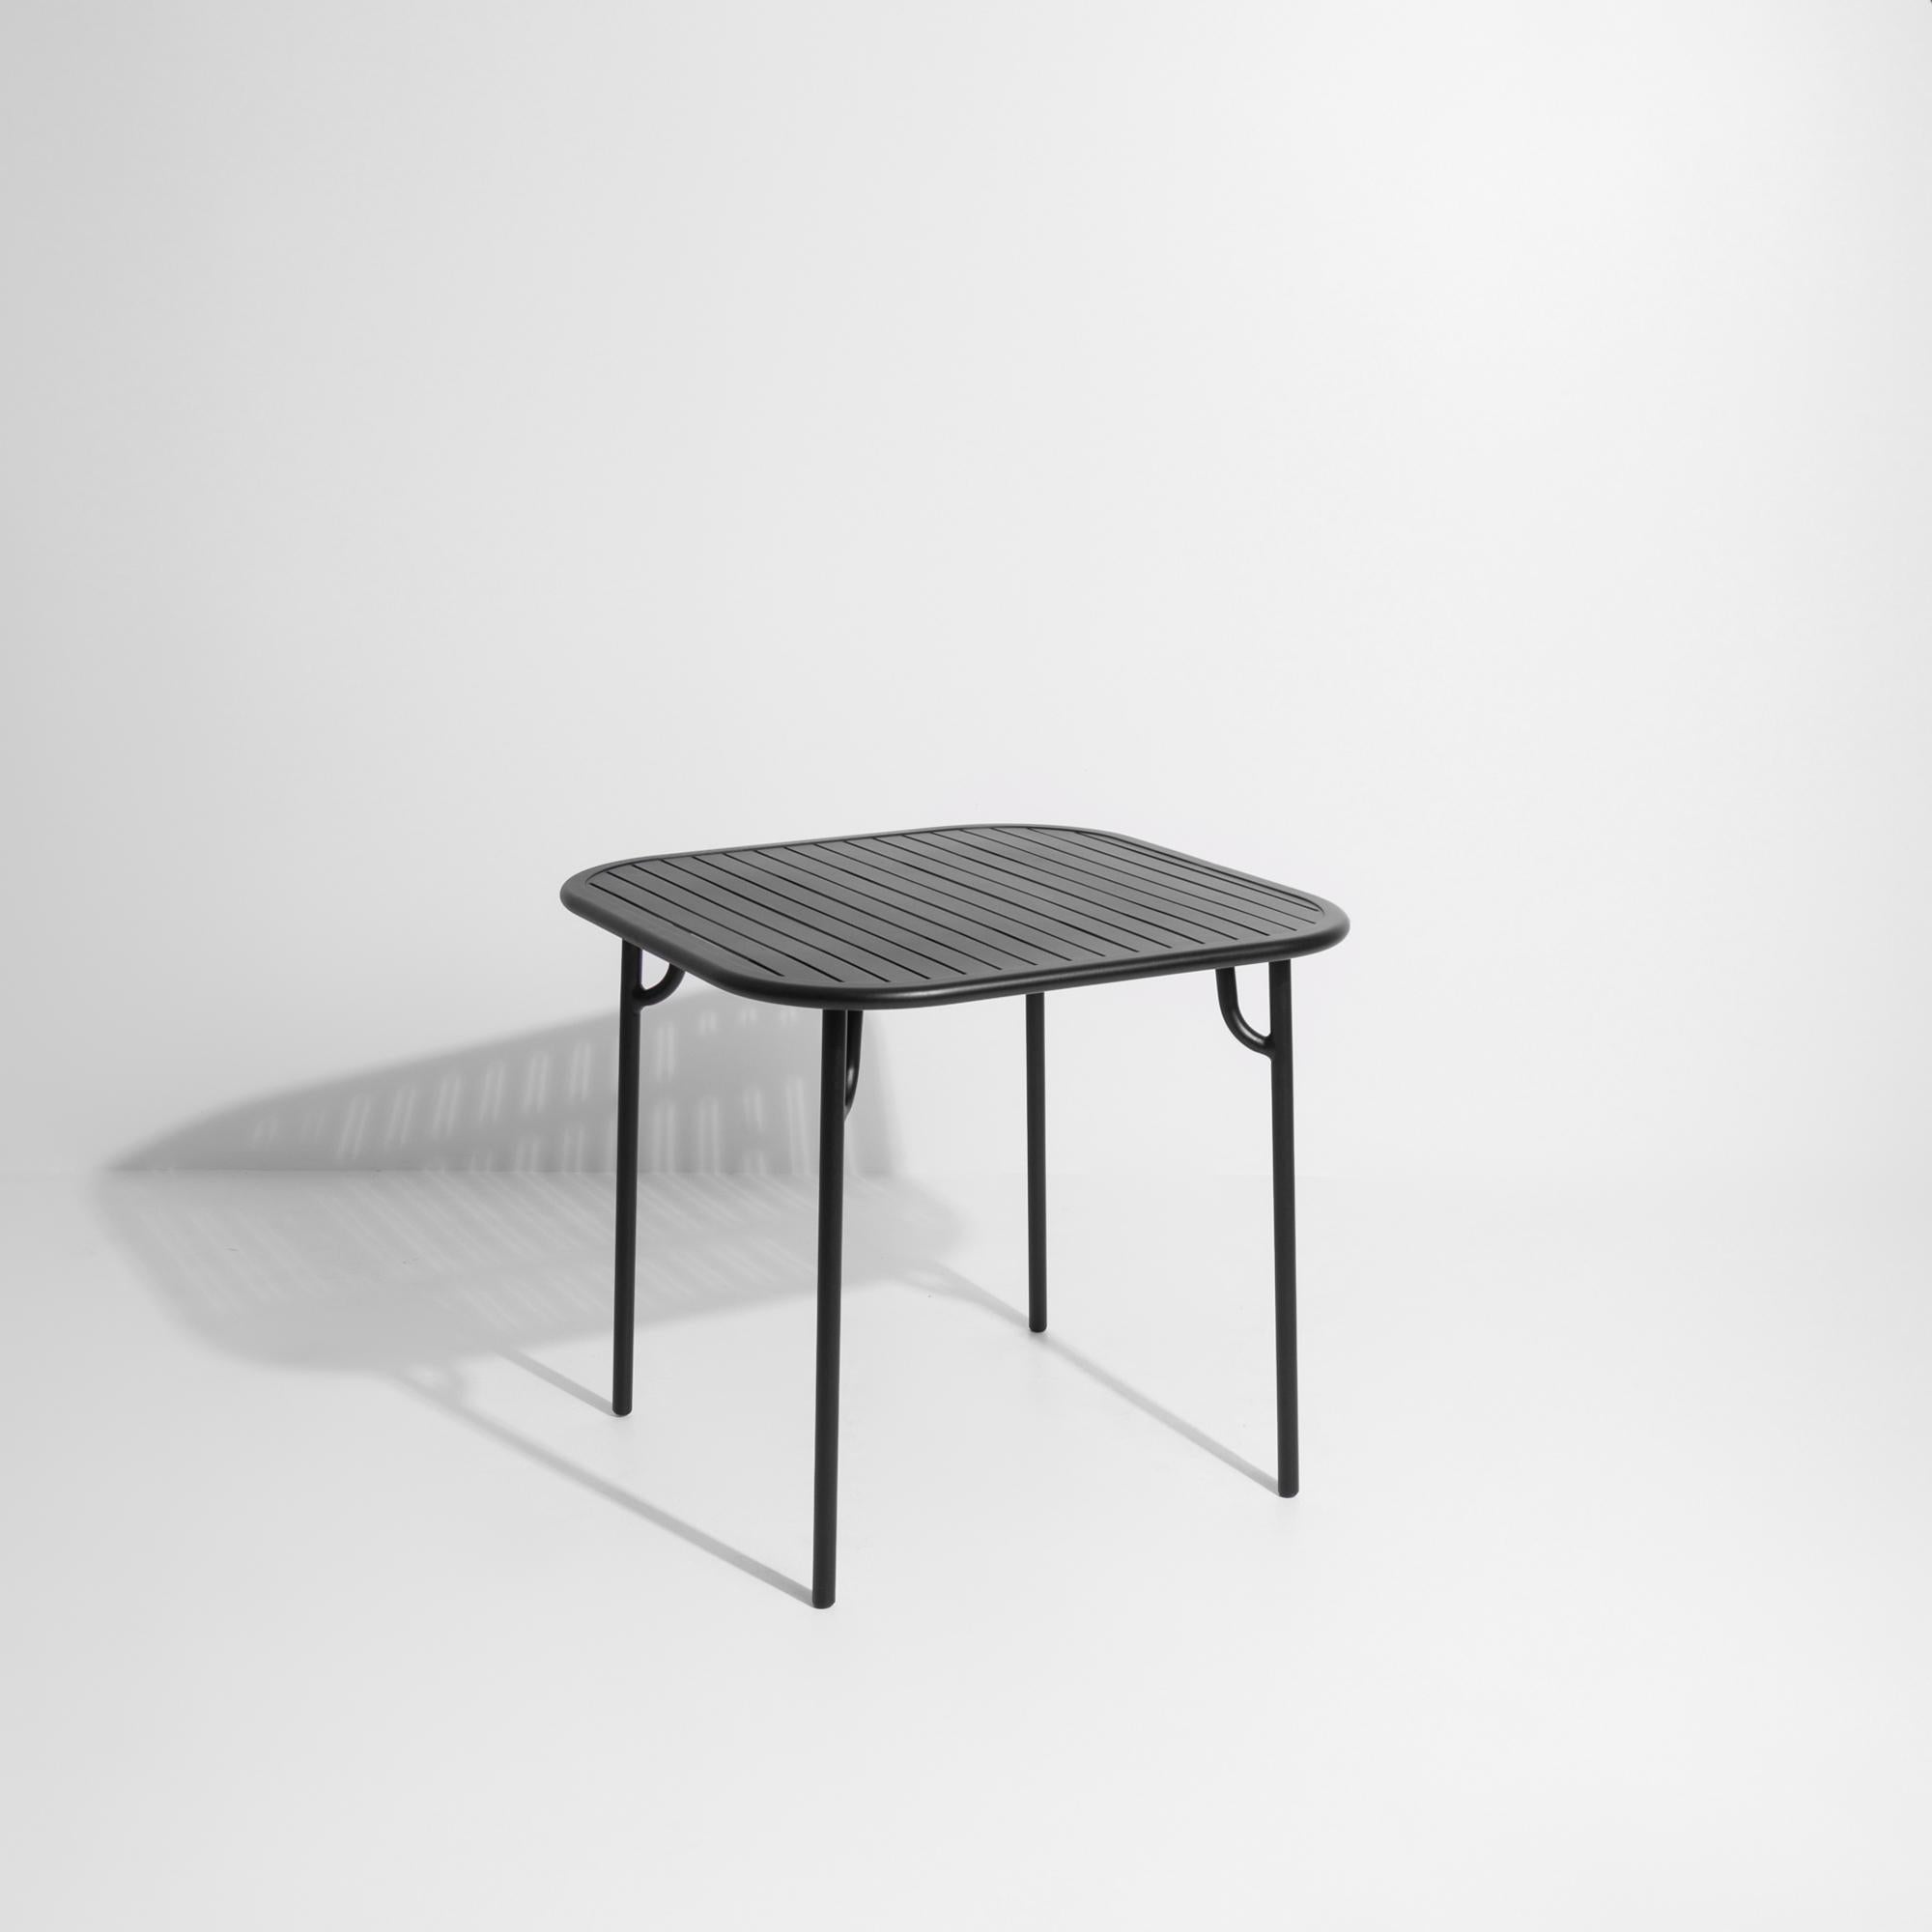 Petite Friture Week-End Square Dining Table in Black Aluminium with Slats In New Condition For Sale In Brooklyn, NY